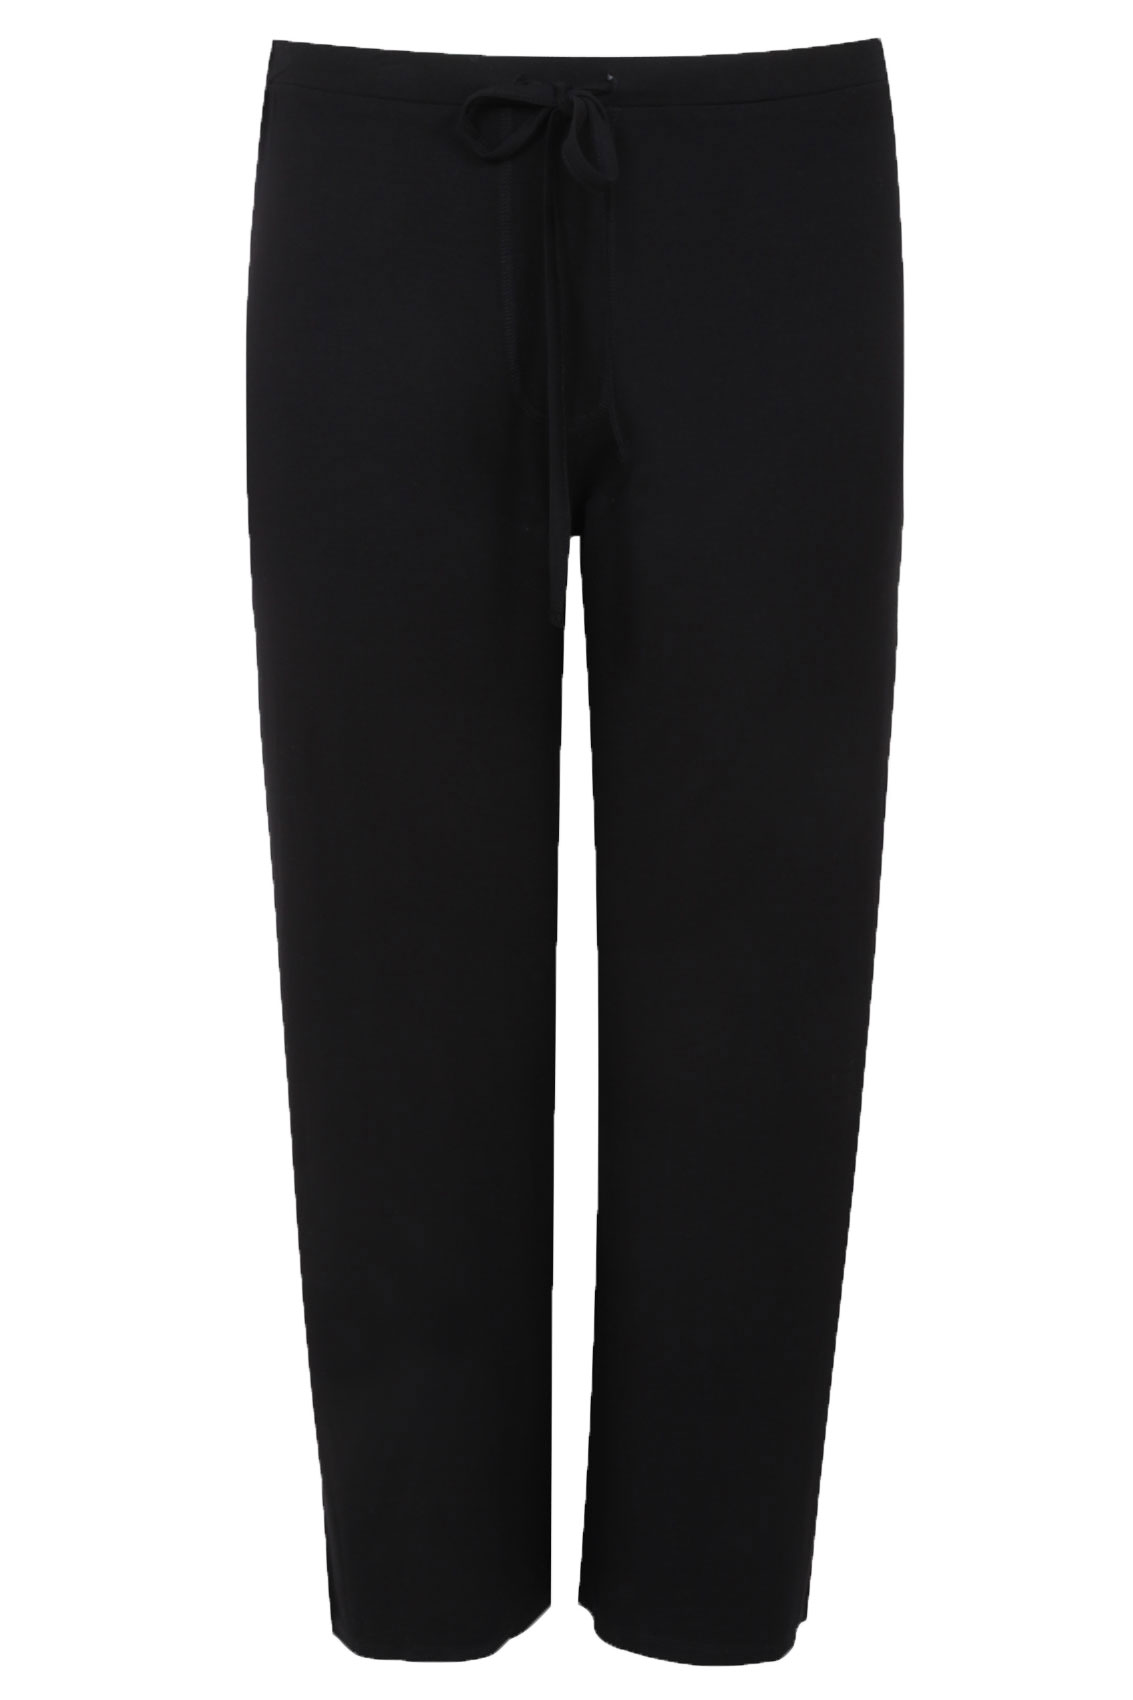 Black Wide Leg Pull On Stretch Jersey Yoga Trousers plus size 16 to 36